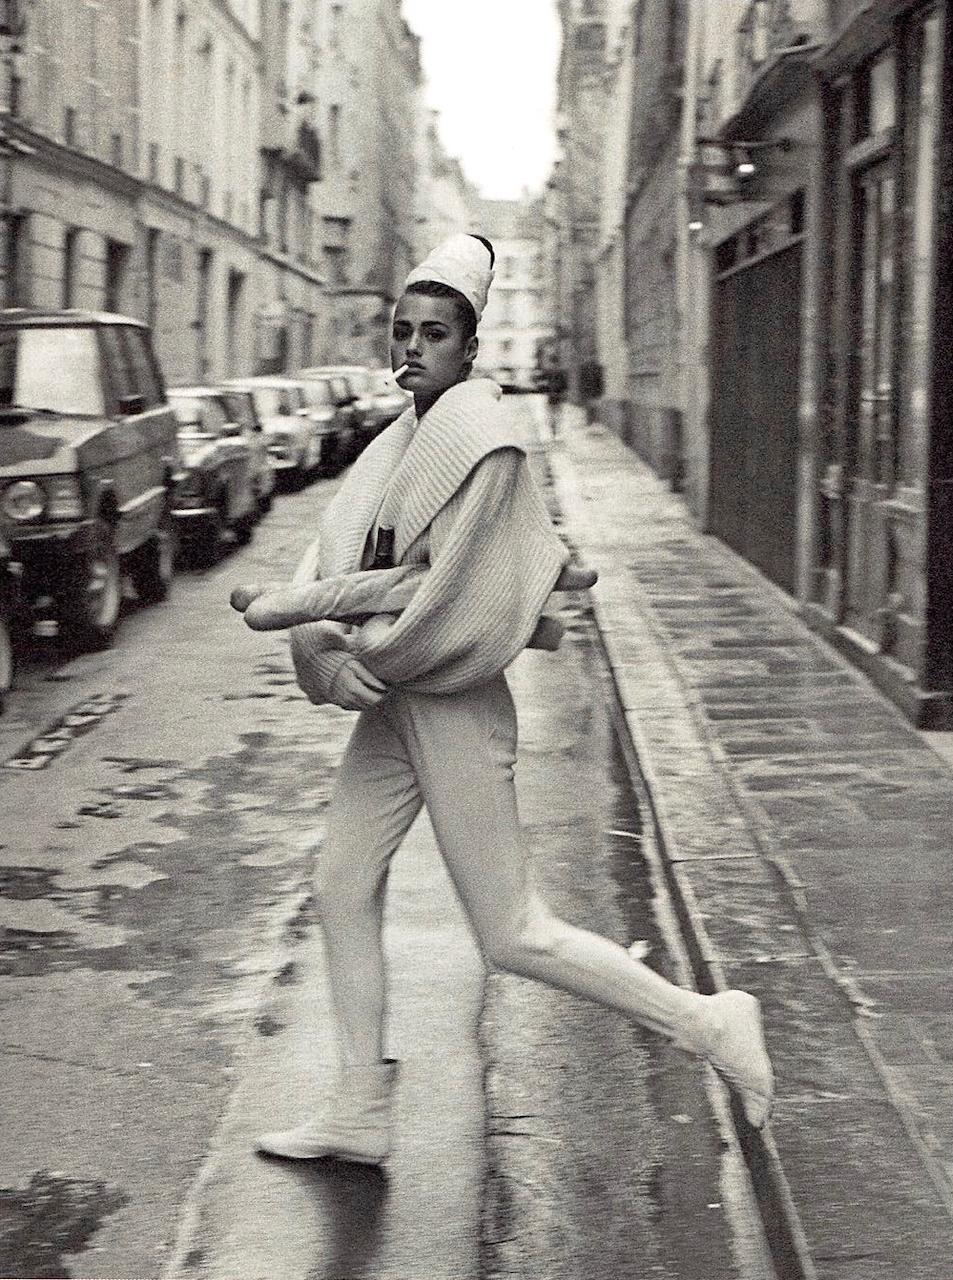 Yasmin Le Bon wore an AZZEDINE ALAÏA IVORY WOOL CARDIGAN from the Fall/Winter 1984–85 collection in the New York Times Magazine's "Paris Panache" editorial shot by Peter Lindbergh in Paris in 1985.